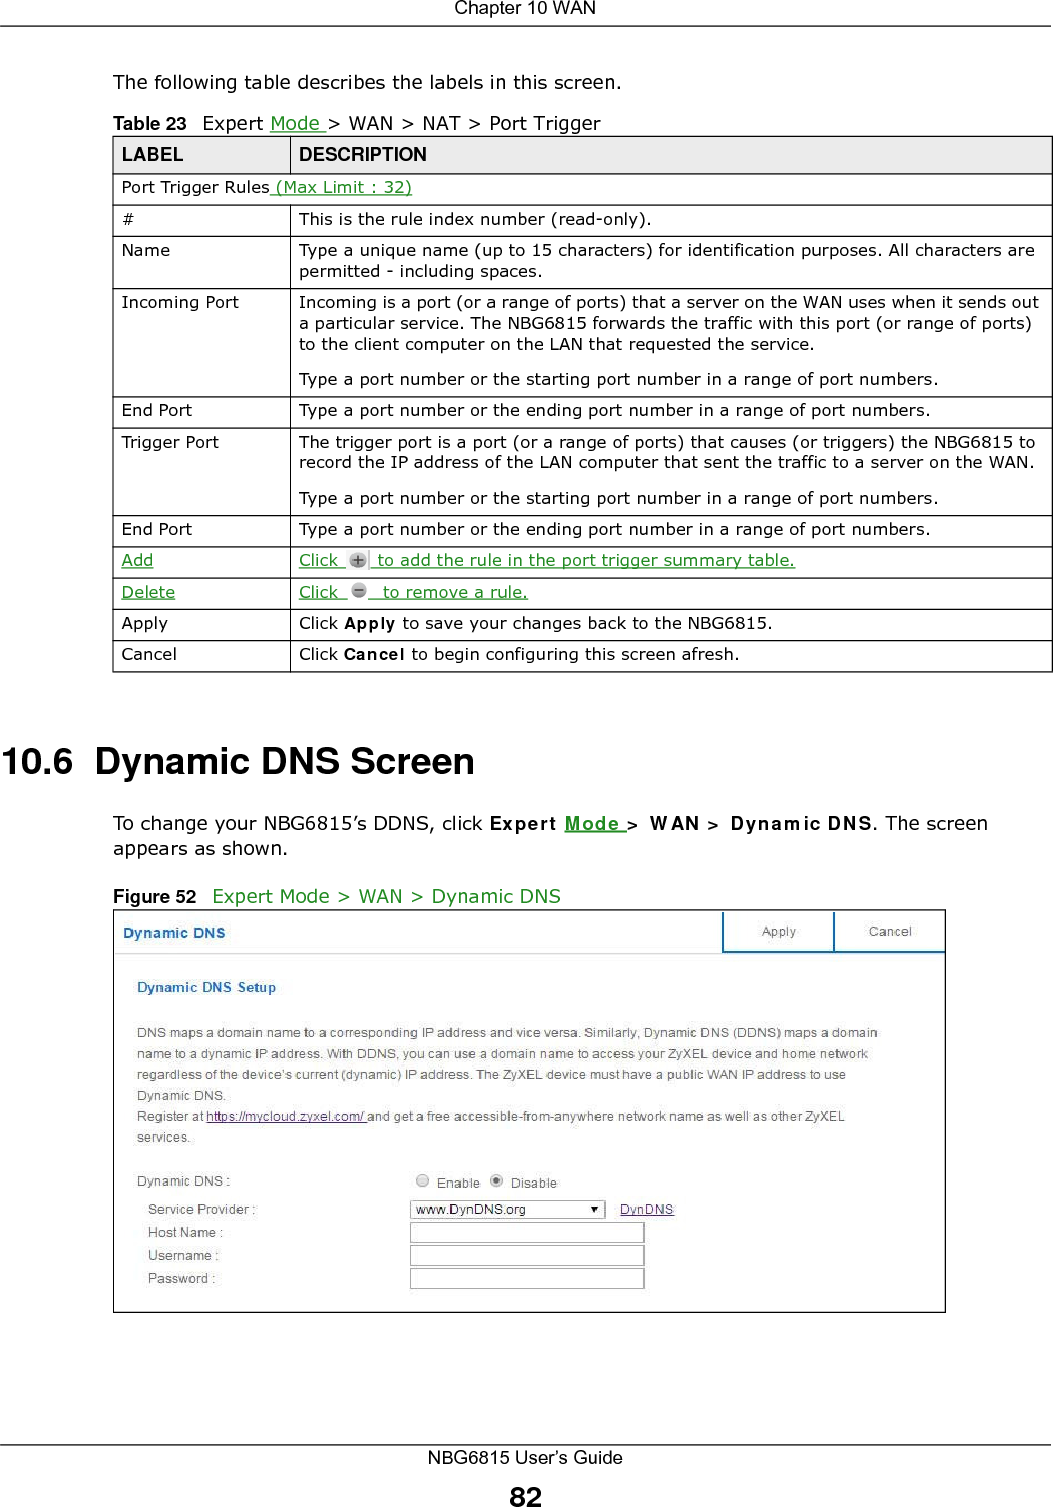 Chapter 10 WANNBG6815 User’s Guide82The following table describes the labels in this screen.10.6  Dynamic DNS ScreenTo change your NBG6815’s DDNS, click Expert Mode &gt; WAN &gt; Dynamic DNS. The screen appears as shown.Figure 52   Expert Mode &gt; WAN &gt; Dynamic DNS Table 23   Expert Mode &gt; WAN &gt; NAT &gt; Port TriggerLABEL DESCRIPTIONPort Trigger Rules (Max Limit : 32)#This is the rule index number (read-only).Name Type a unique name (up to 15 characters) for identification purposes. All characters are permitted - including spaces.Incoming Port Incoming is a port (or a range of ports) that a server on the WAN uses when it sends out a particular service. The NBG6815 forwards the traffic with this port (or range of ports) to the client computer on the LAN that requested the service. Type a port number or the starting port number in a range of port numbers.End Port Type a port number or the ending port number in a range of port numbers.Trigger Port The trigger port is a port (or a range of ports) that causes (or triggers) the NBG6815 to record the IP address of the LAN computer that sent the traffic to a server on the WAN.Type a port number or the starting port number in a range of port numbers.End Port Type a port number or the ending port number in a range of port numbers.Add Click   to add the rule in the port trigger summary table.Delete Click   to remove a rule.Apply Click Apply to save your changes back to the NBG6815.Cancel Click Cancel to begin configuring this screen afresh.